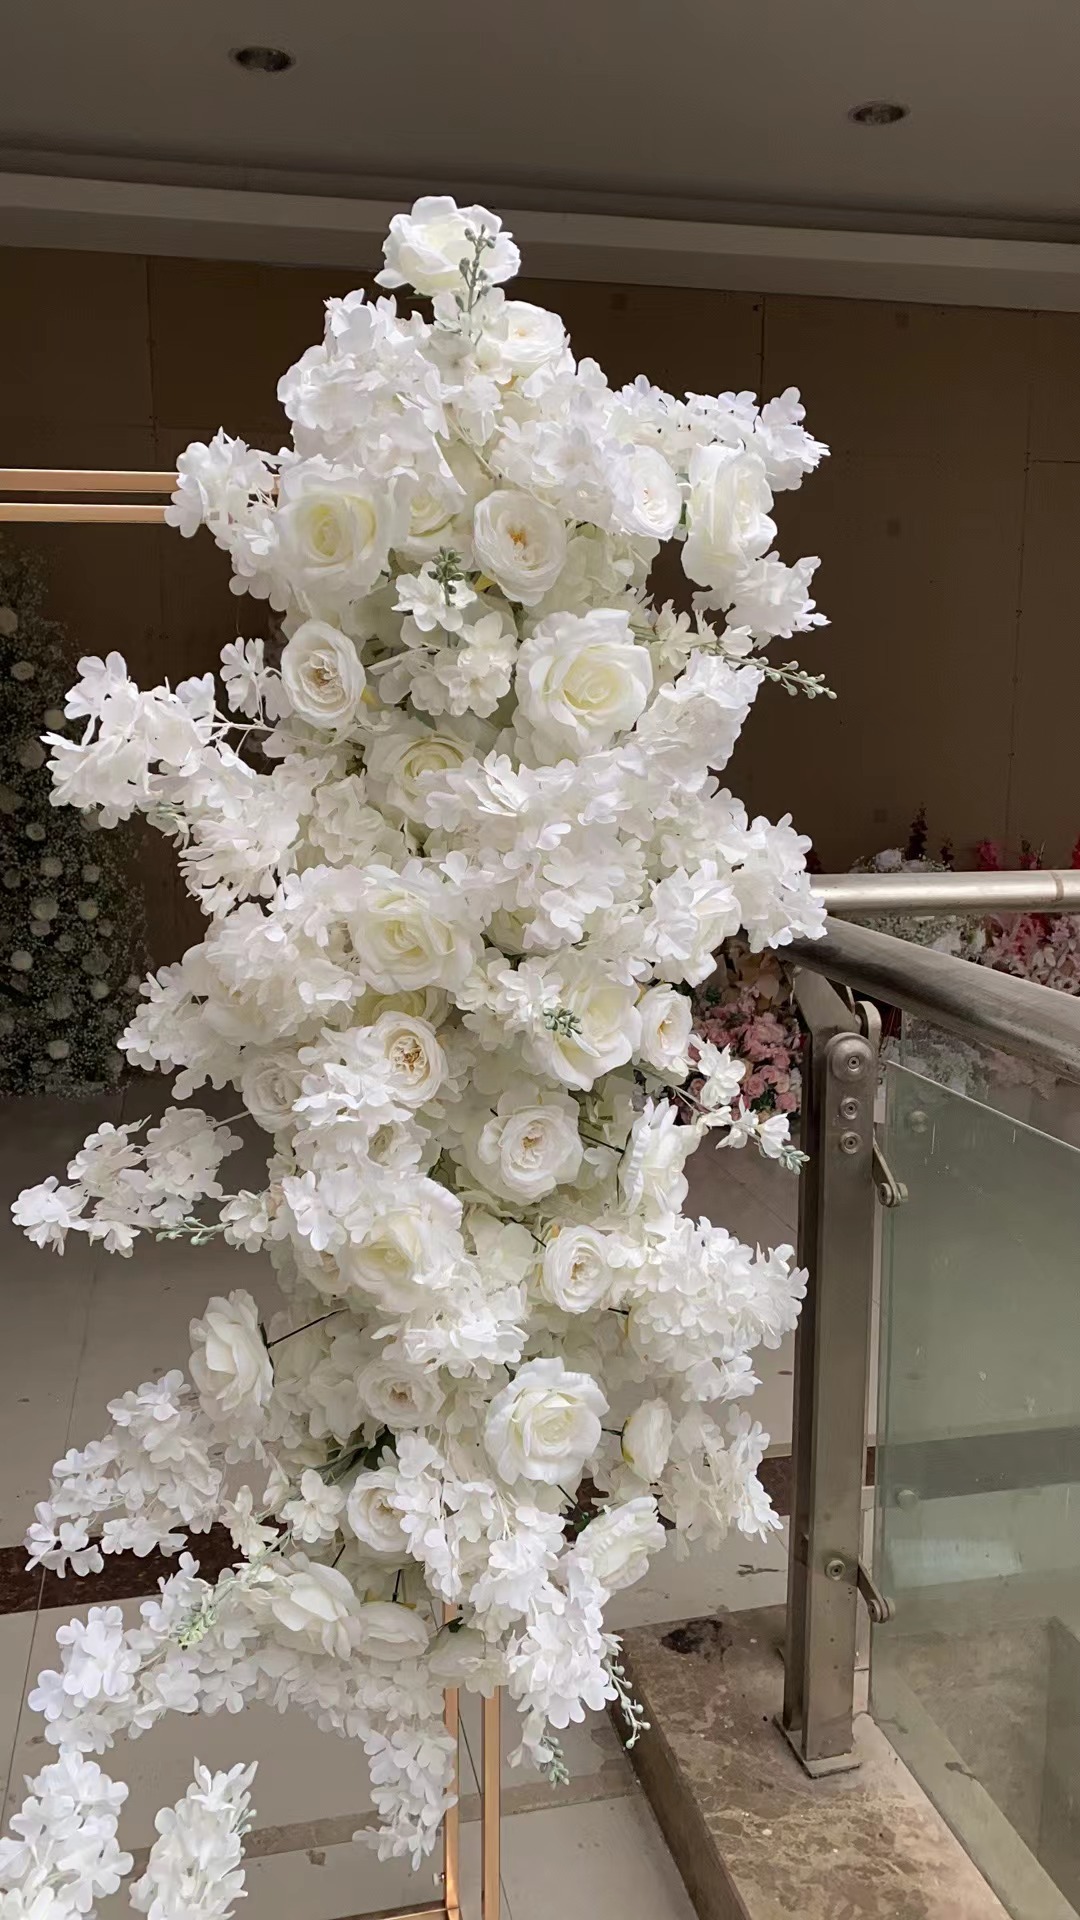 New artificial cherry blossom row flower ball shopping mall showroom window decoration flower wedding background stage table layout flower